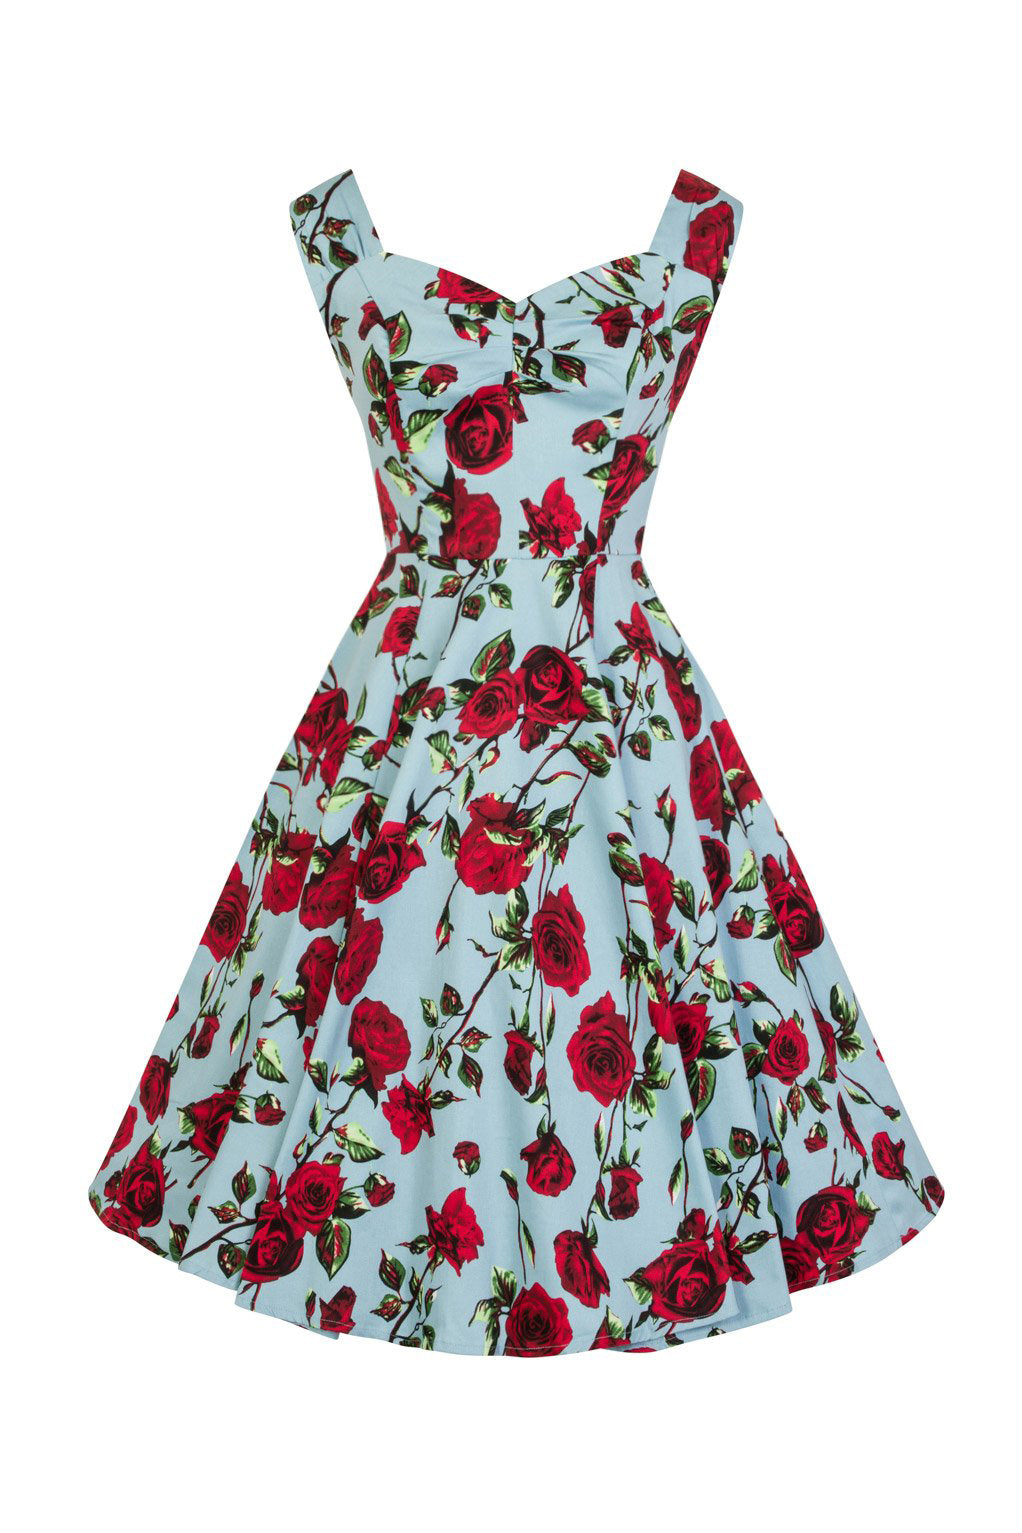 Sky Blue and Red Rose Floral Print Rockabilly 50s Swing Dress - Pretty Kitty Fashion